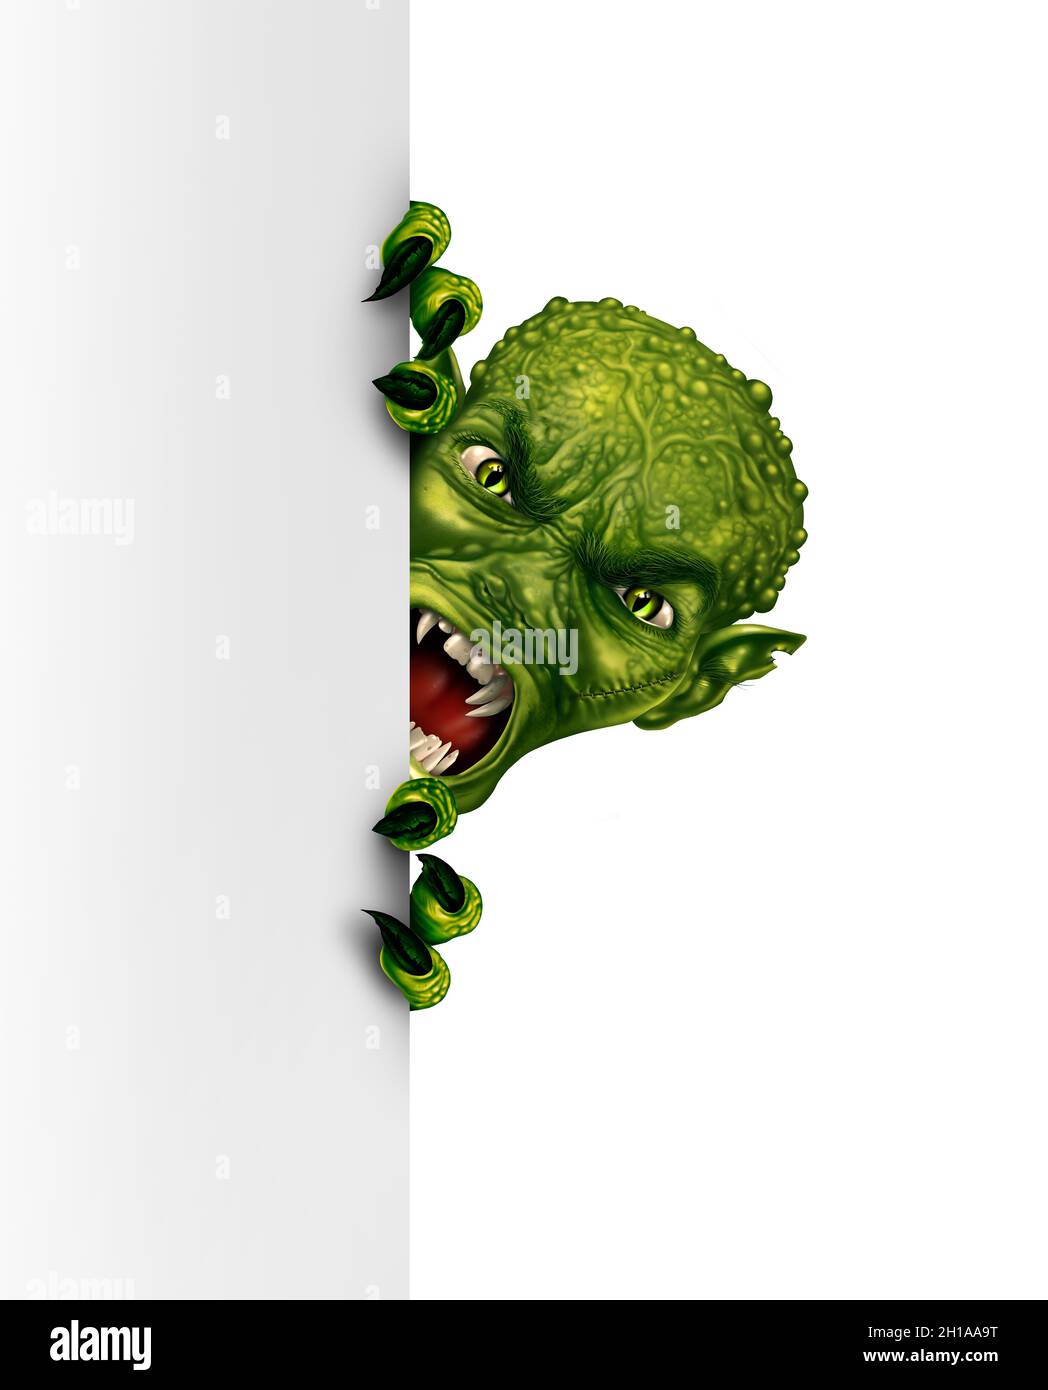 Zombie or space alien lurking behind a vertical blank white sign as an angry creepy green monster hiding and peeping behind a billboard as a spooky. Stock Photo